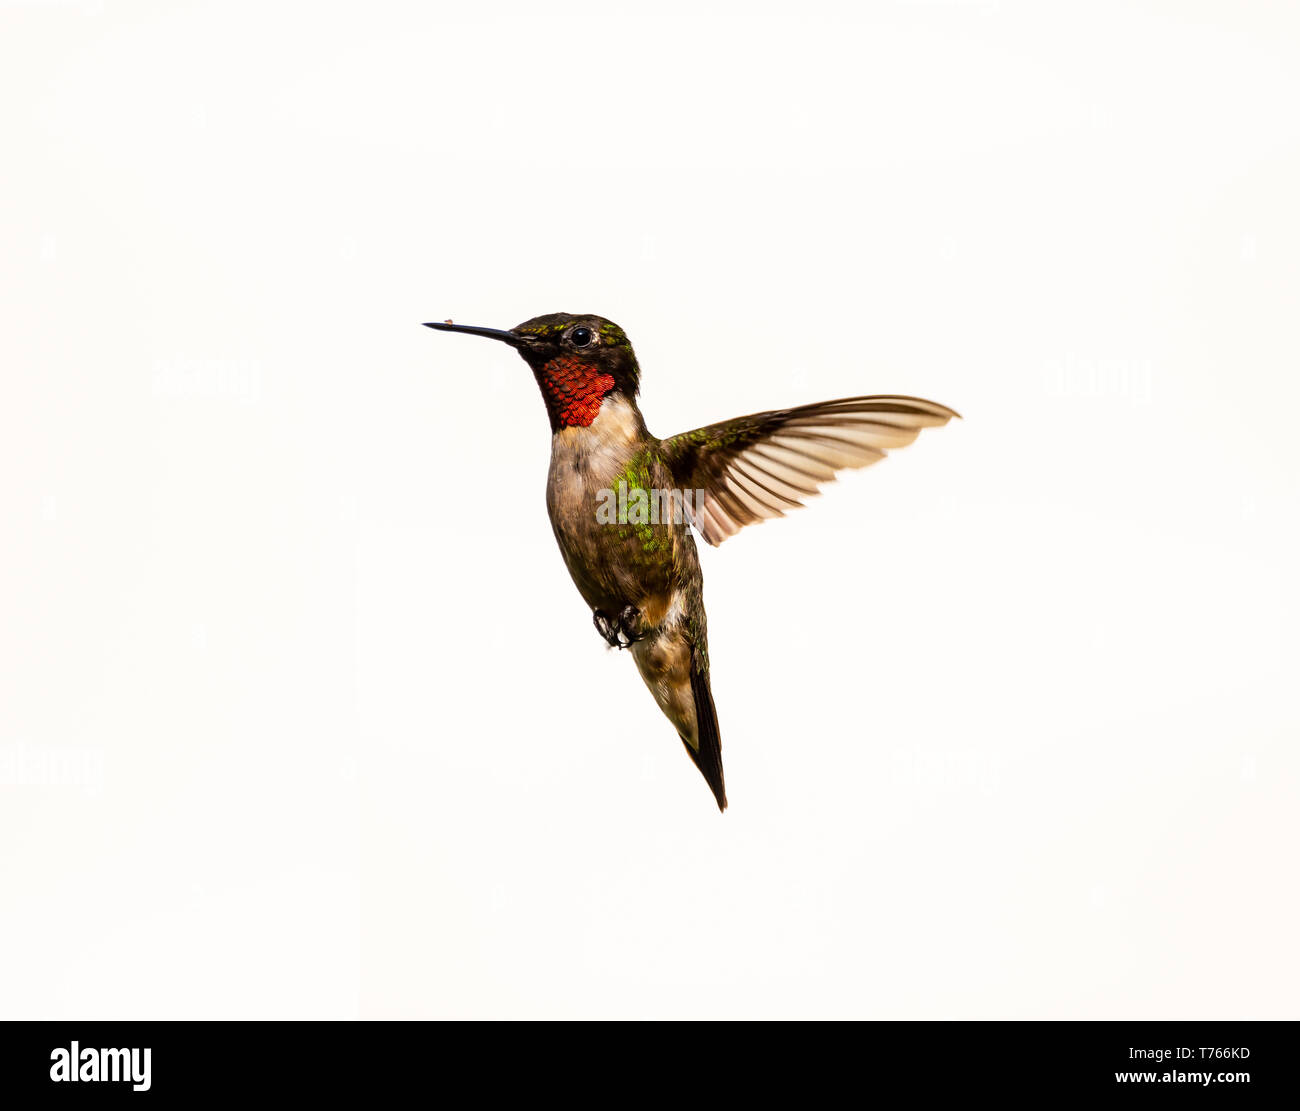 Ruby-Throated avec Hummingbird nectar sur son bec planant dans les airs. Banque D'Images